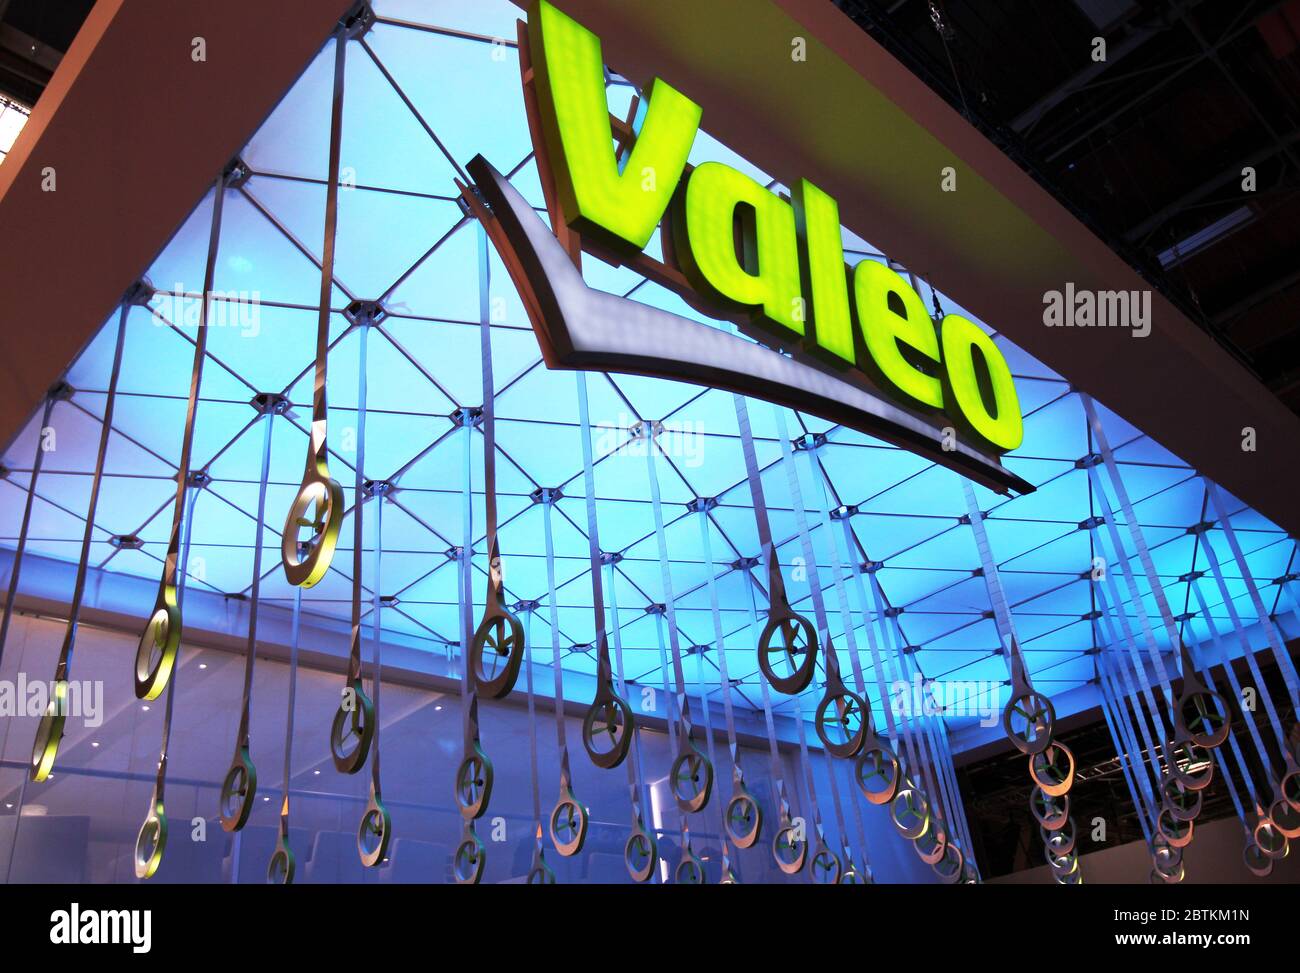 Paris, France. 27th Sep, 2012. File photo taken on Sept. 27, 2012 shows the logo of French car parts maker Valeo at the 2012 Paris Auto Show in Paris, France. French President Emmanuel Macron on May 26 unveiled an eight-billion-euro (8.78 billion U.S. dollars) rescue plan to help the recovery of the domestic auto industry hit hard by the anti-coronavirus lockdown. The plan focuses on the production of environmentally friendly vehicles. Credit: Gao Jing/Xinhua/Alamy Live News Stock Photo